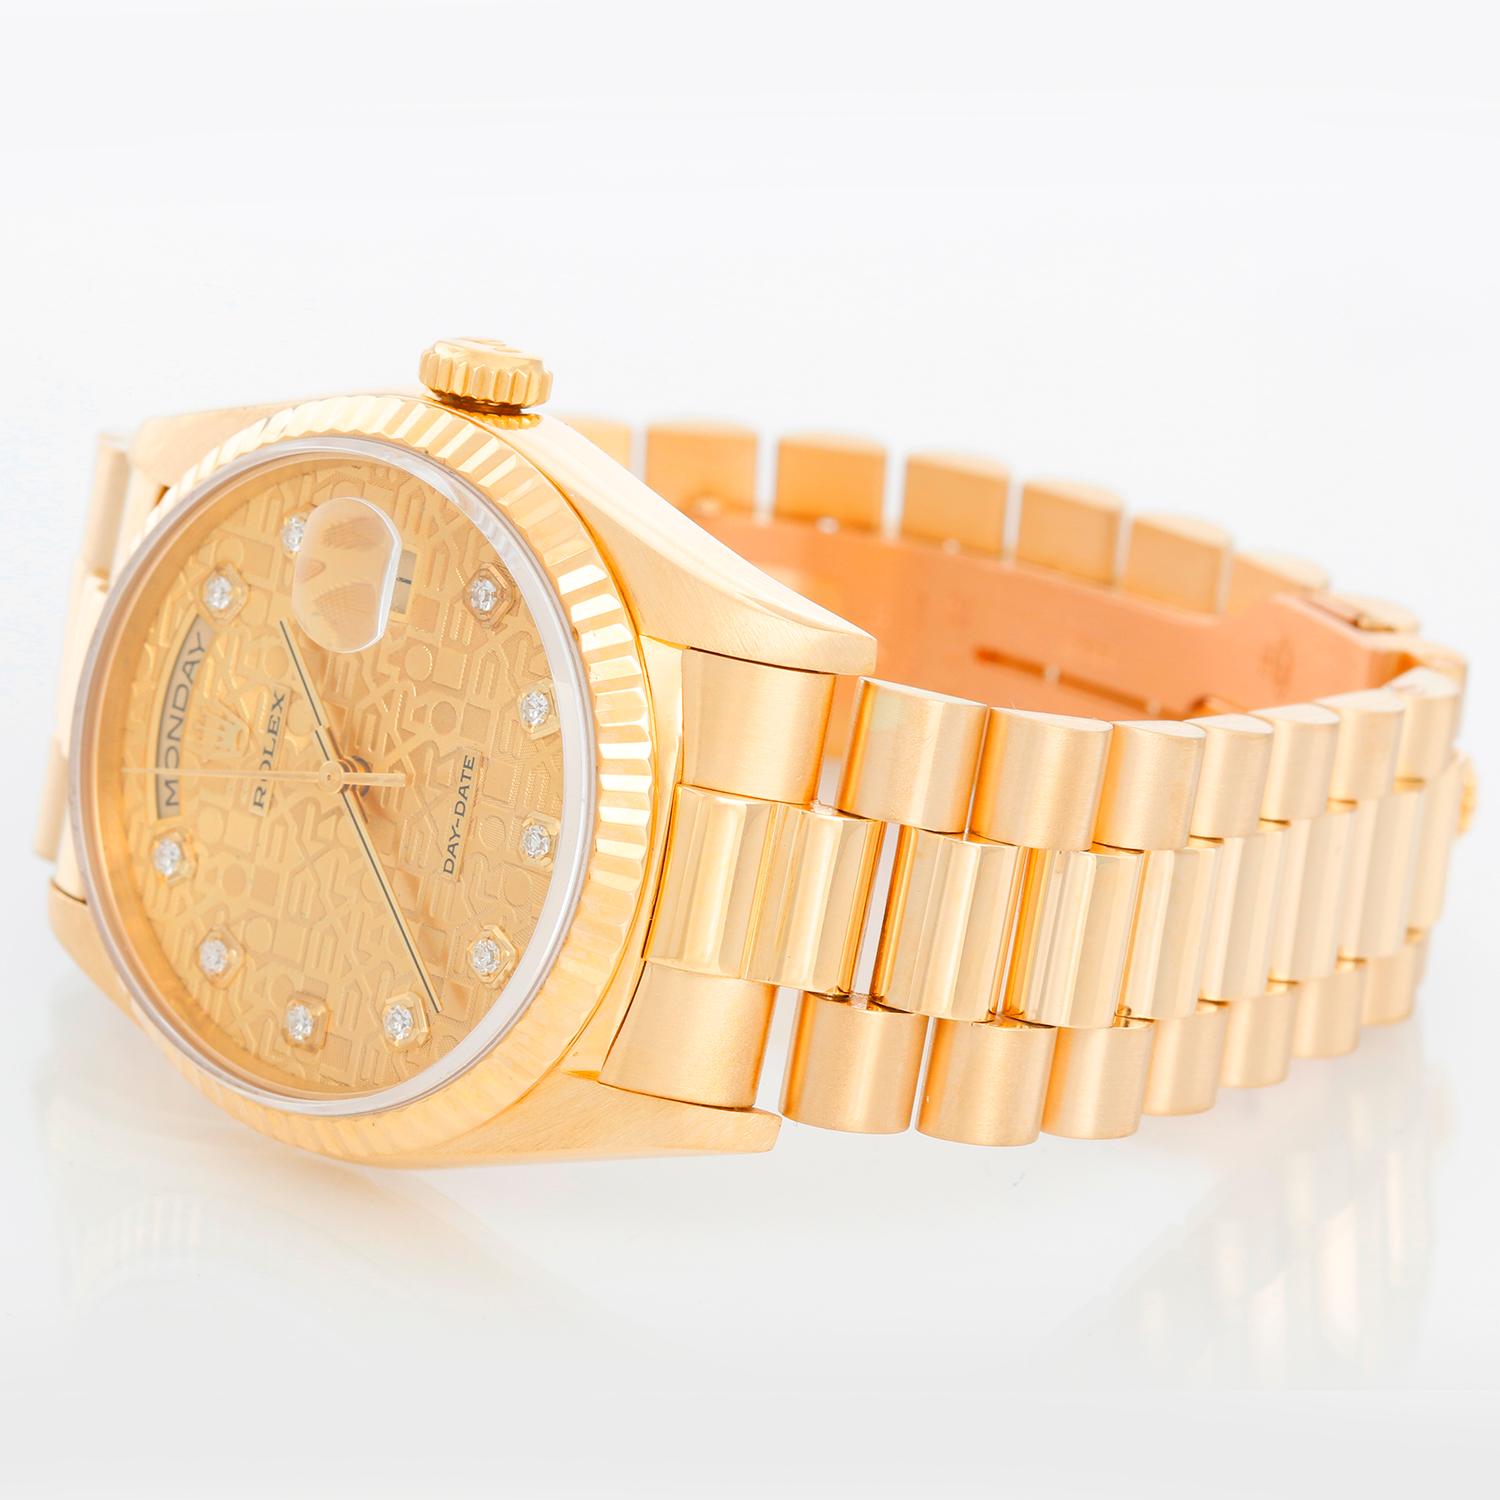 Men's Rolex President - Day-Date Watch 18238 - Automatic winding, 31 jewels, Quickset day/date, sapphire crystal. 18k yellow gold case with fluted bezel . Champagne Jubilee Diamond dial . 18k yellow gold hidden-clasp President bracelet. Pre-owned